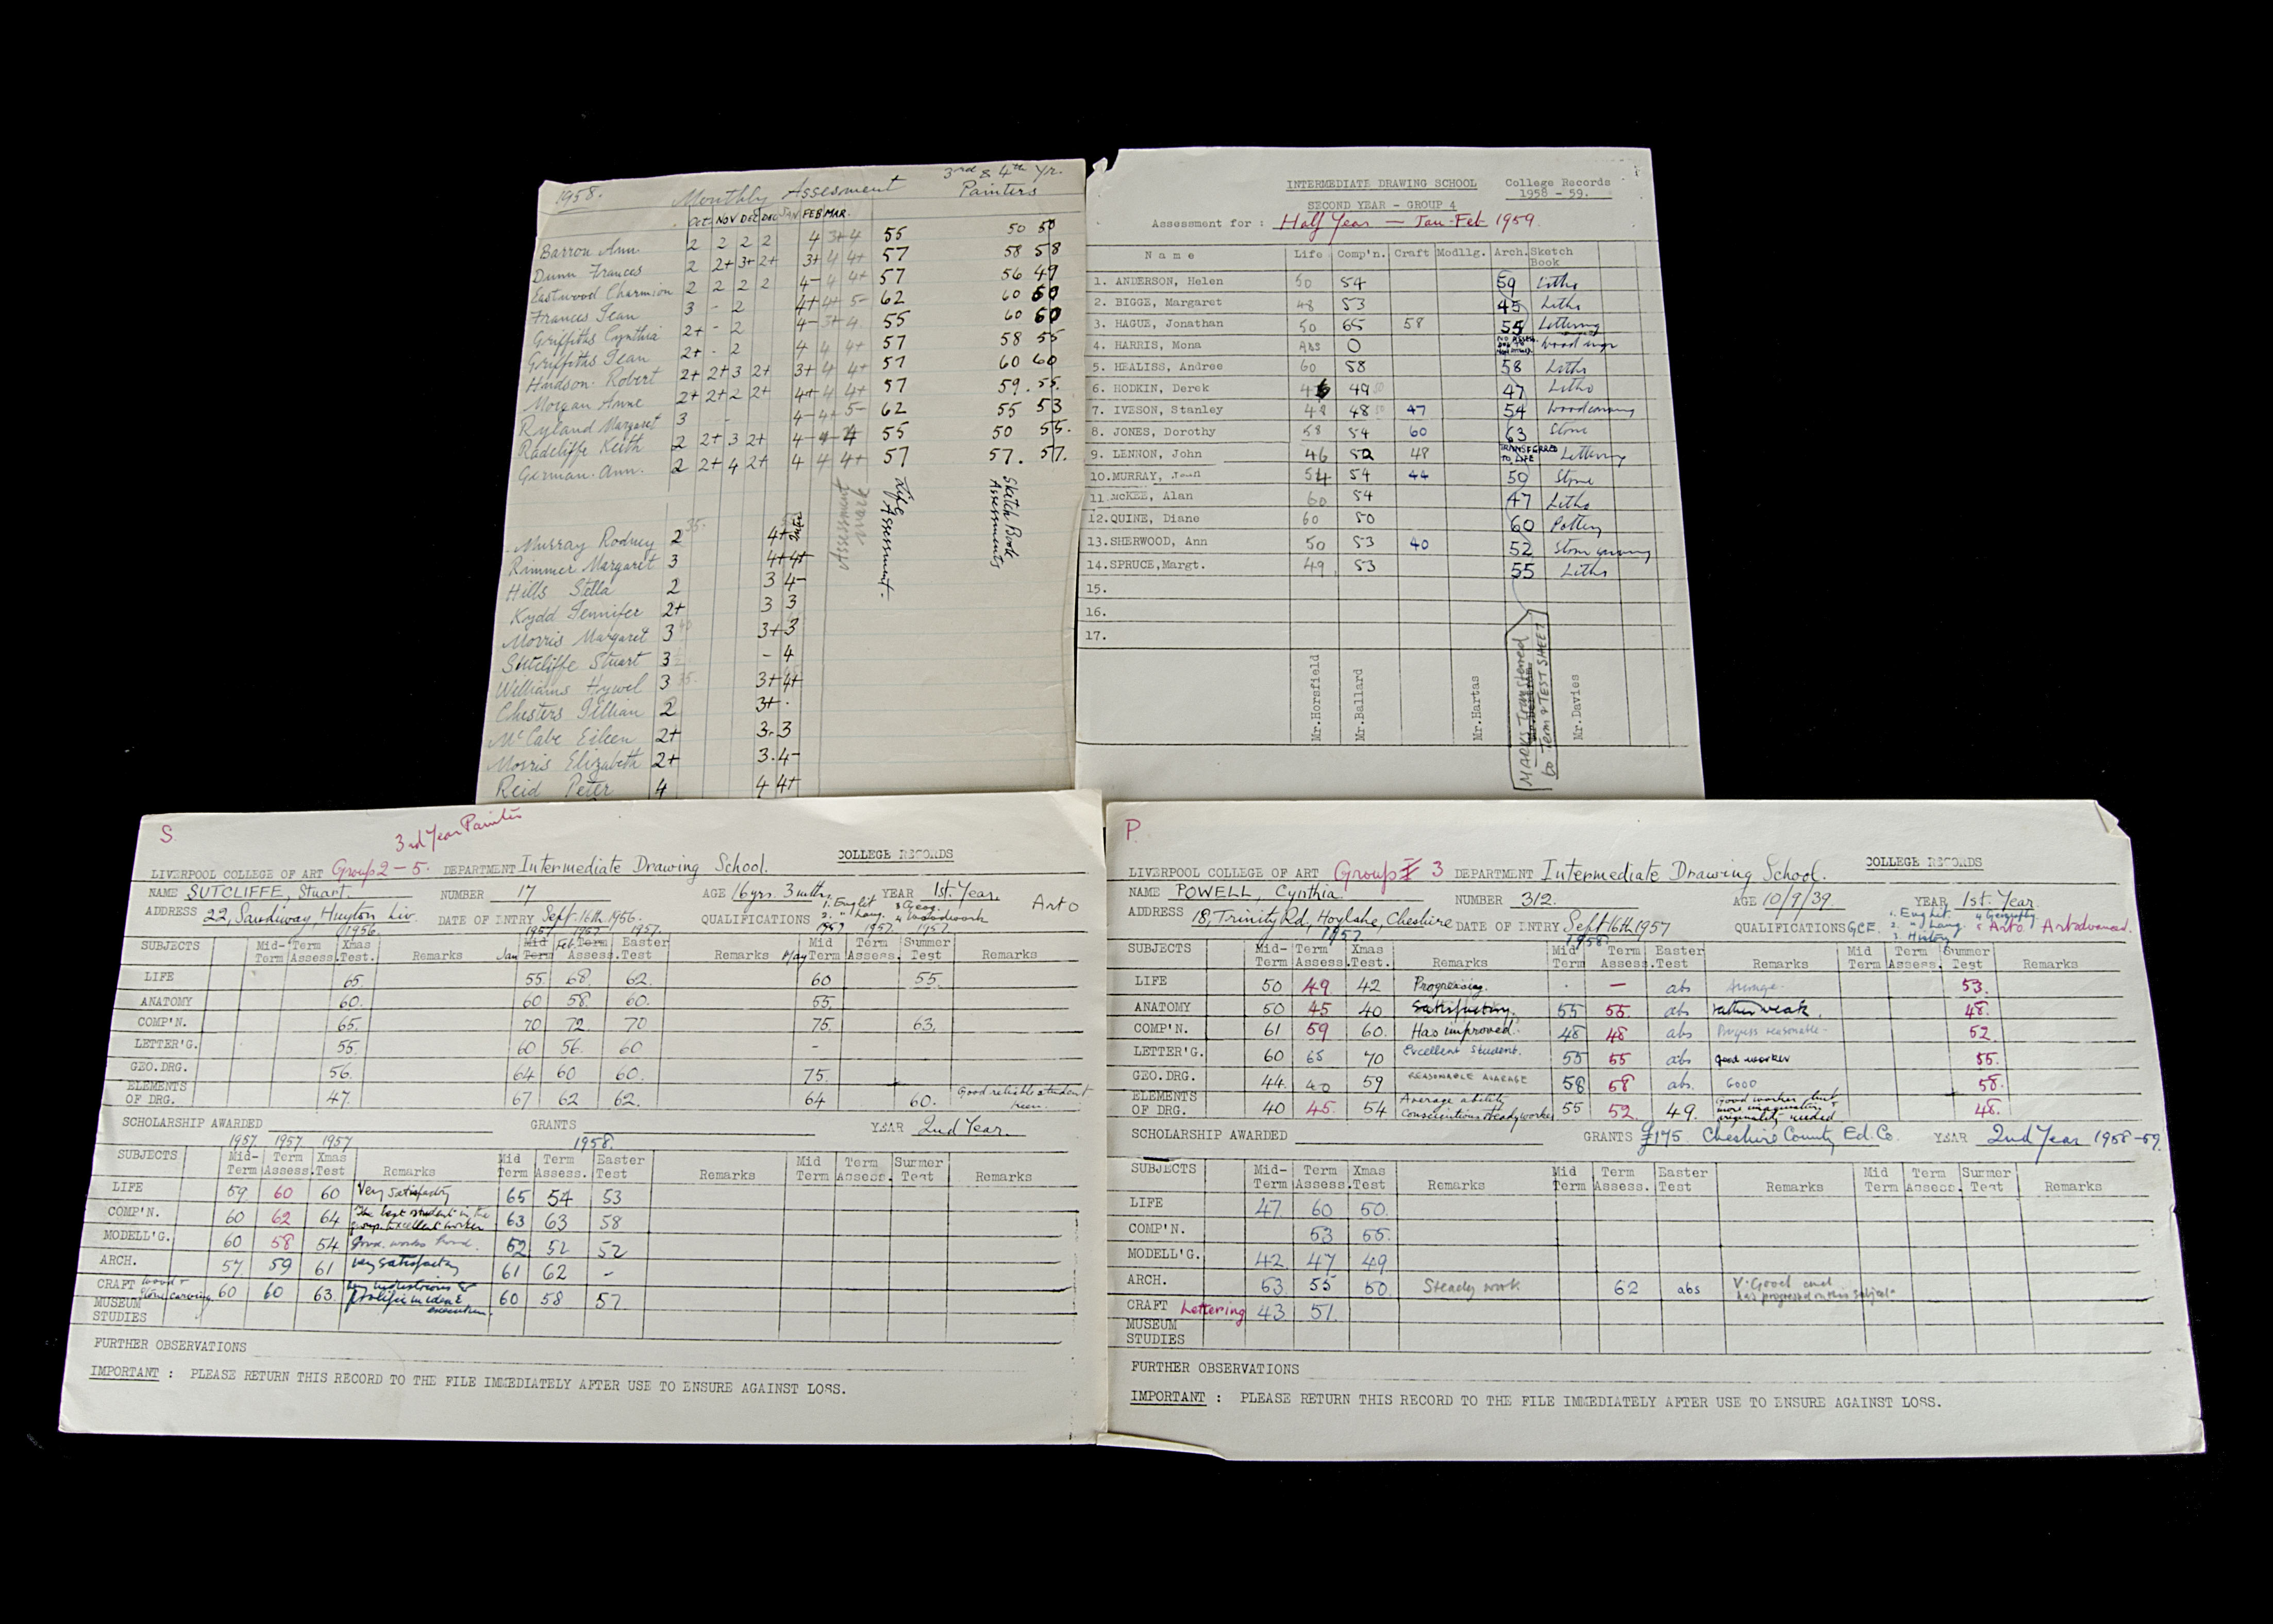 The Beatles Related, Liverpool College Of Art - collection of 'The Intermediate Drawing School Group'  tutorial records and assessment sheets from 1956 to 1960